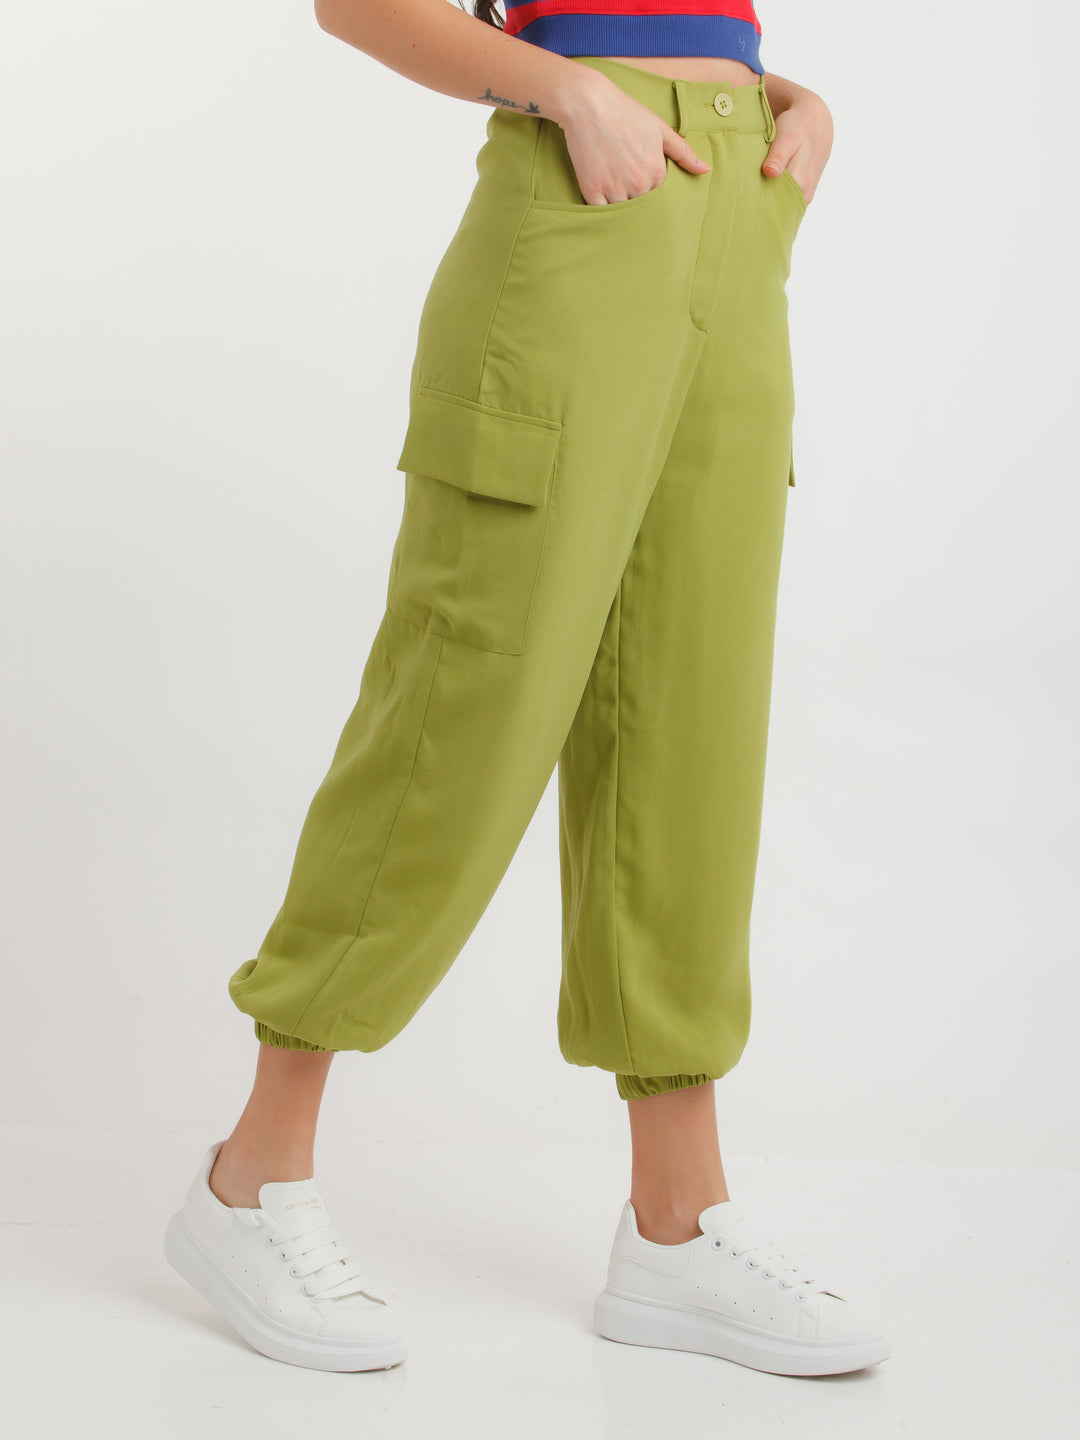 Green Solid Joggers For Women